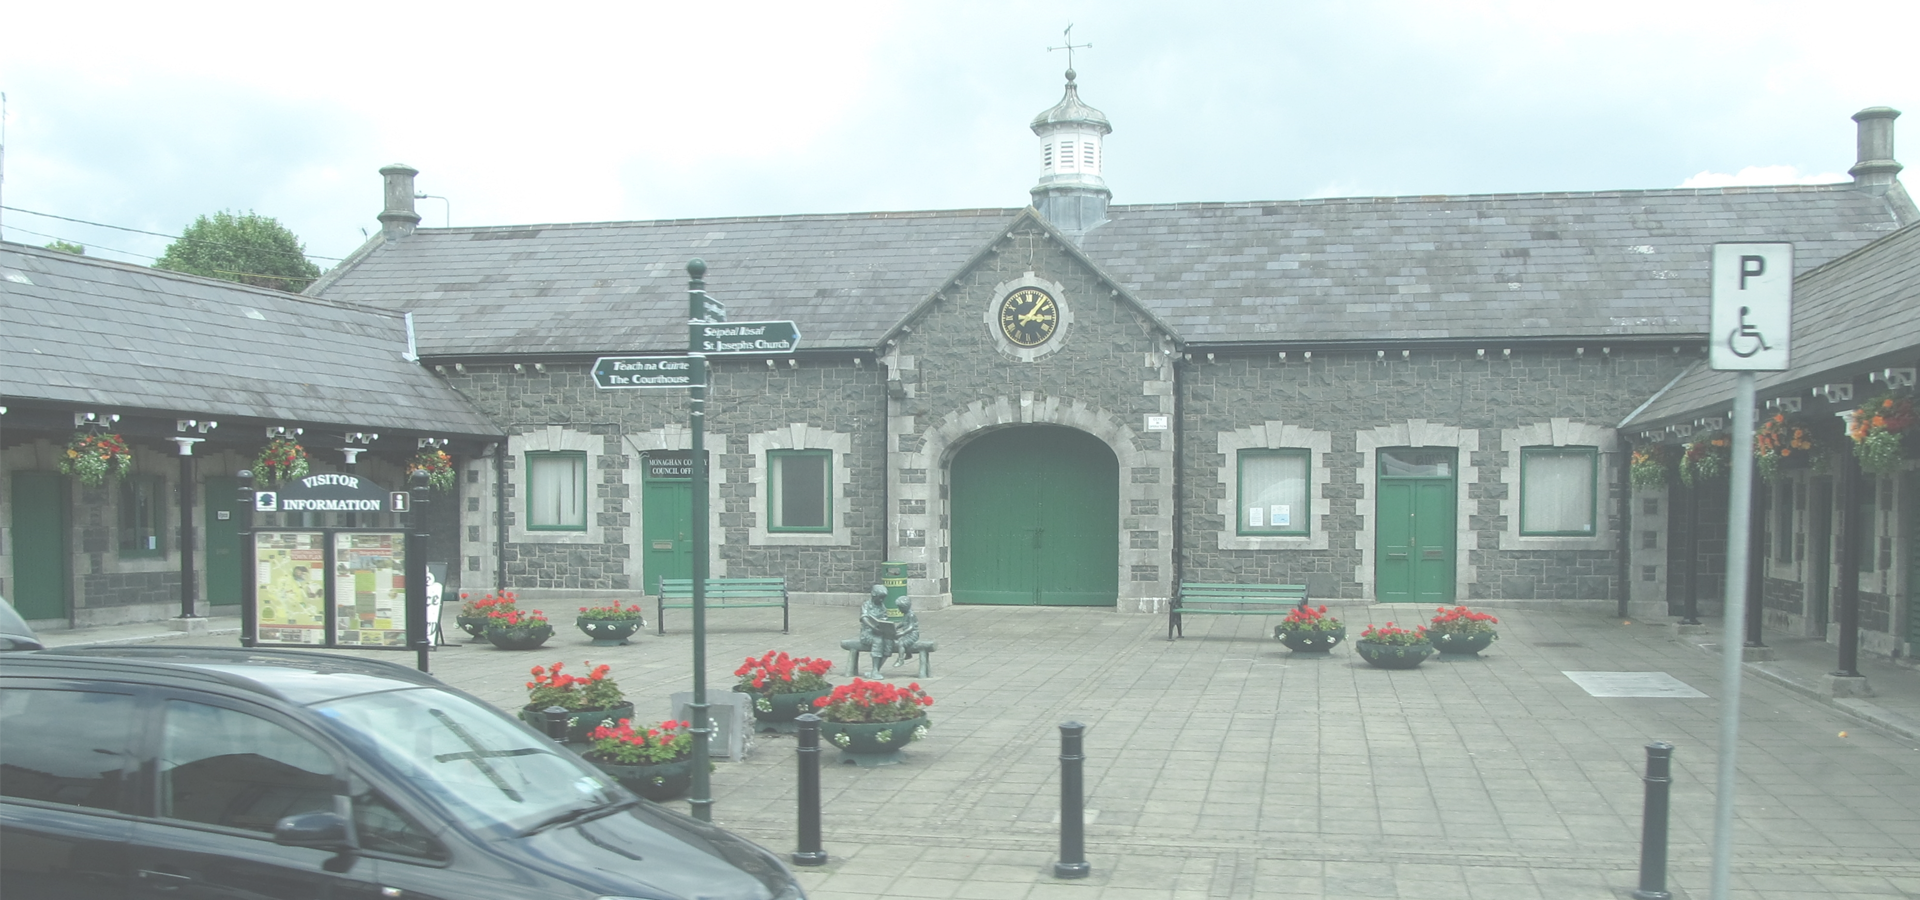 <b>Carrickmacross, County Monaghan, The Province of Ulster, Ireland</b>